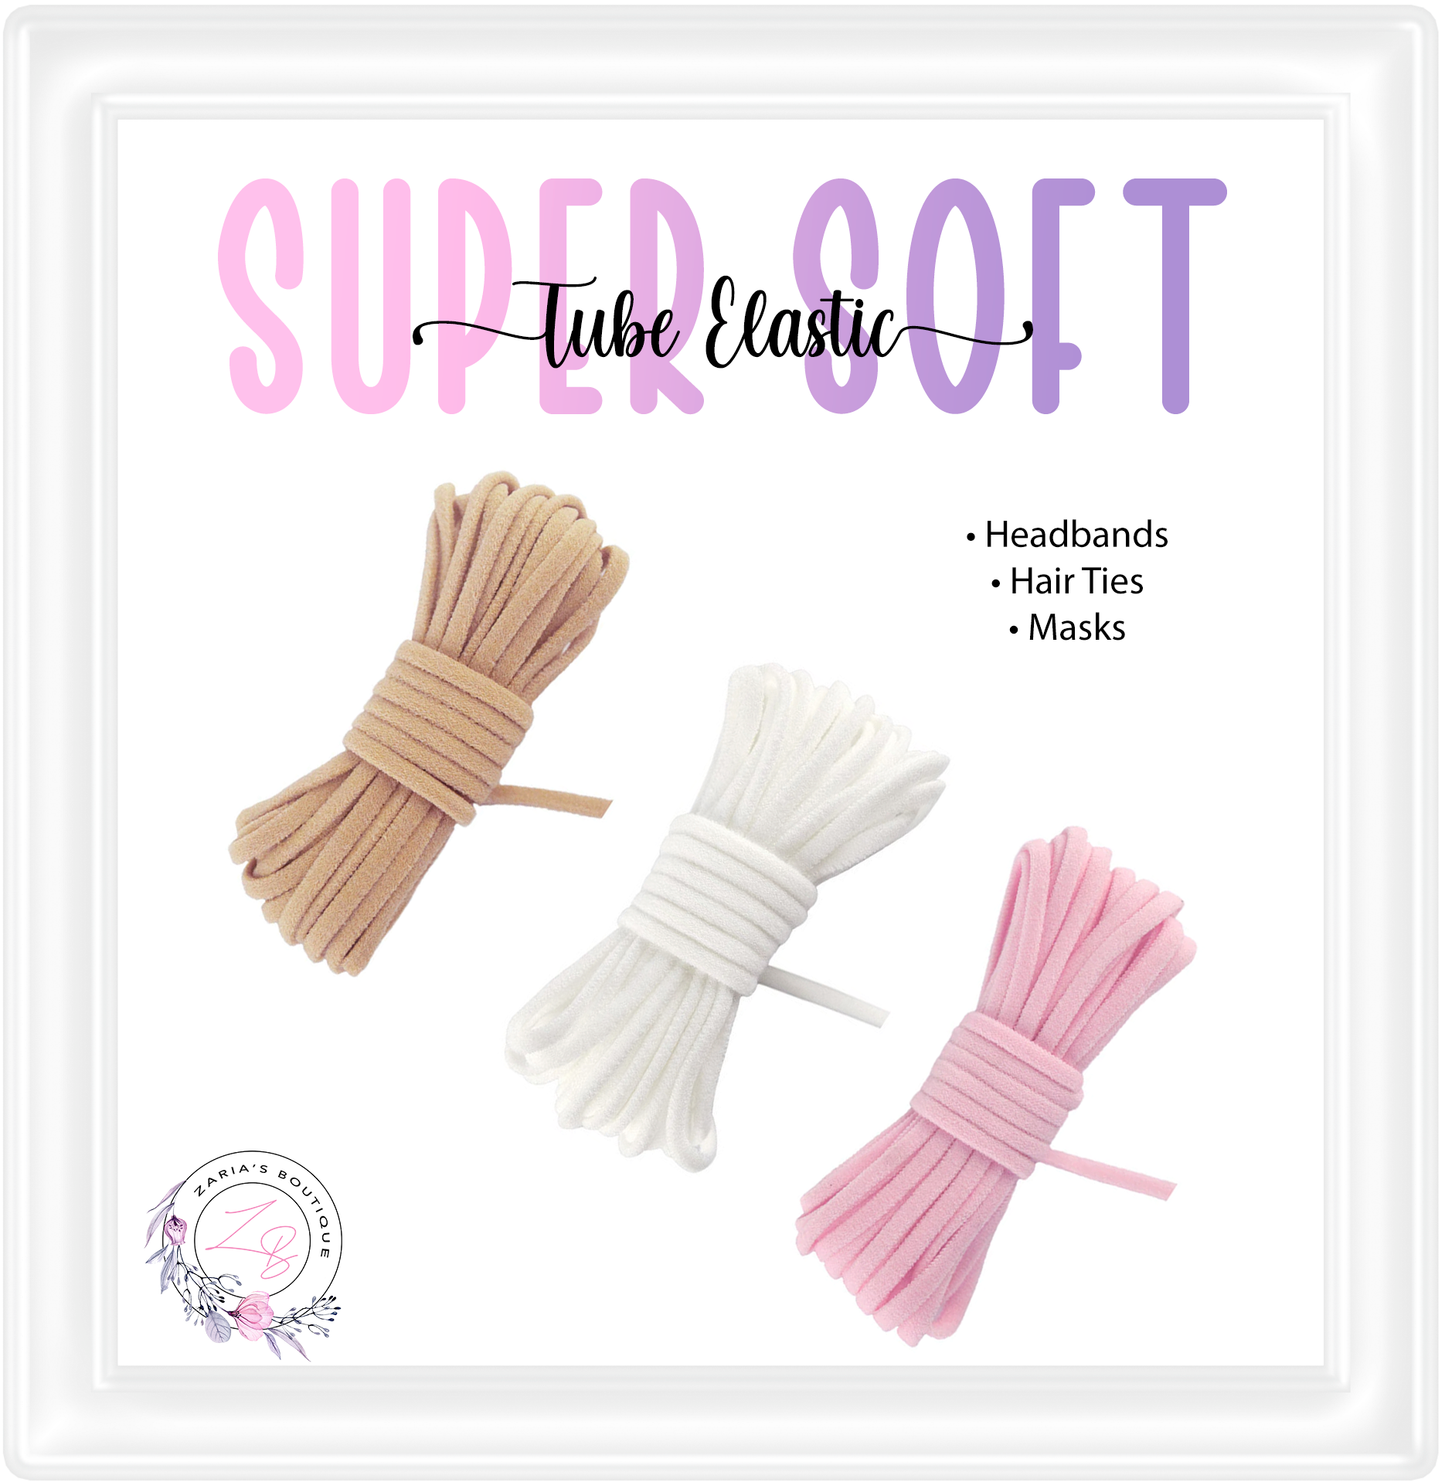 ⋅ Supersoft Tubular Elastic ⋅ Pink Nude White ⋅ 3.0mm ⋅ Per Yard ⋅